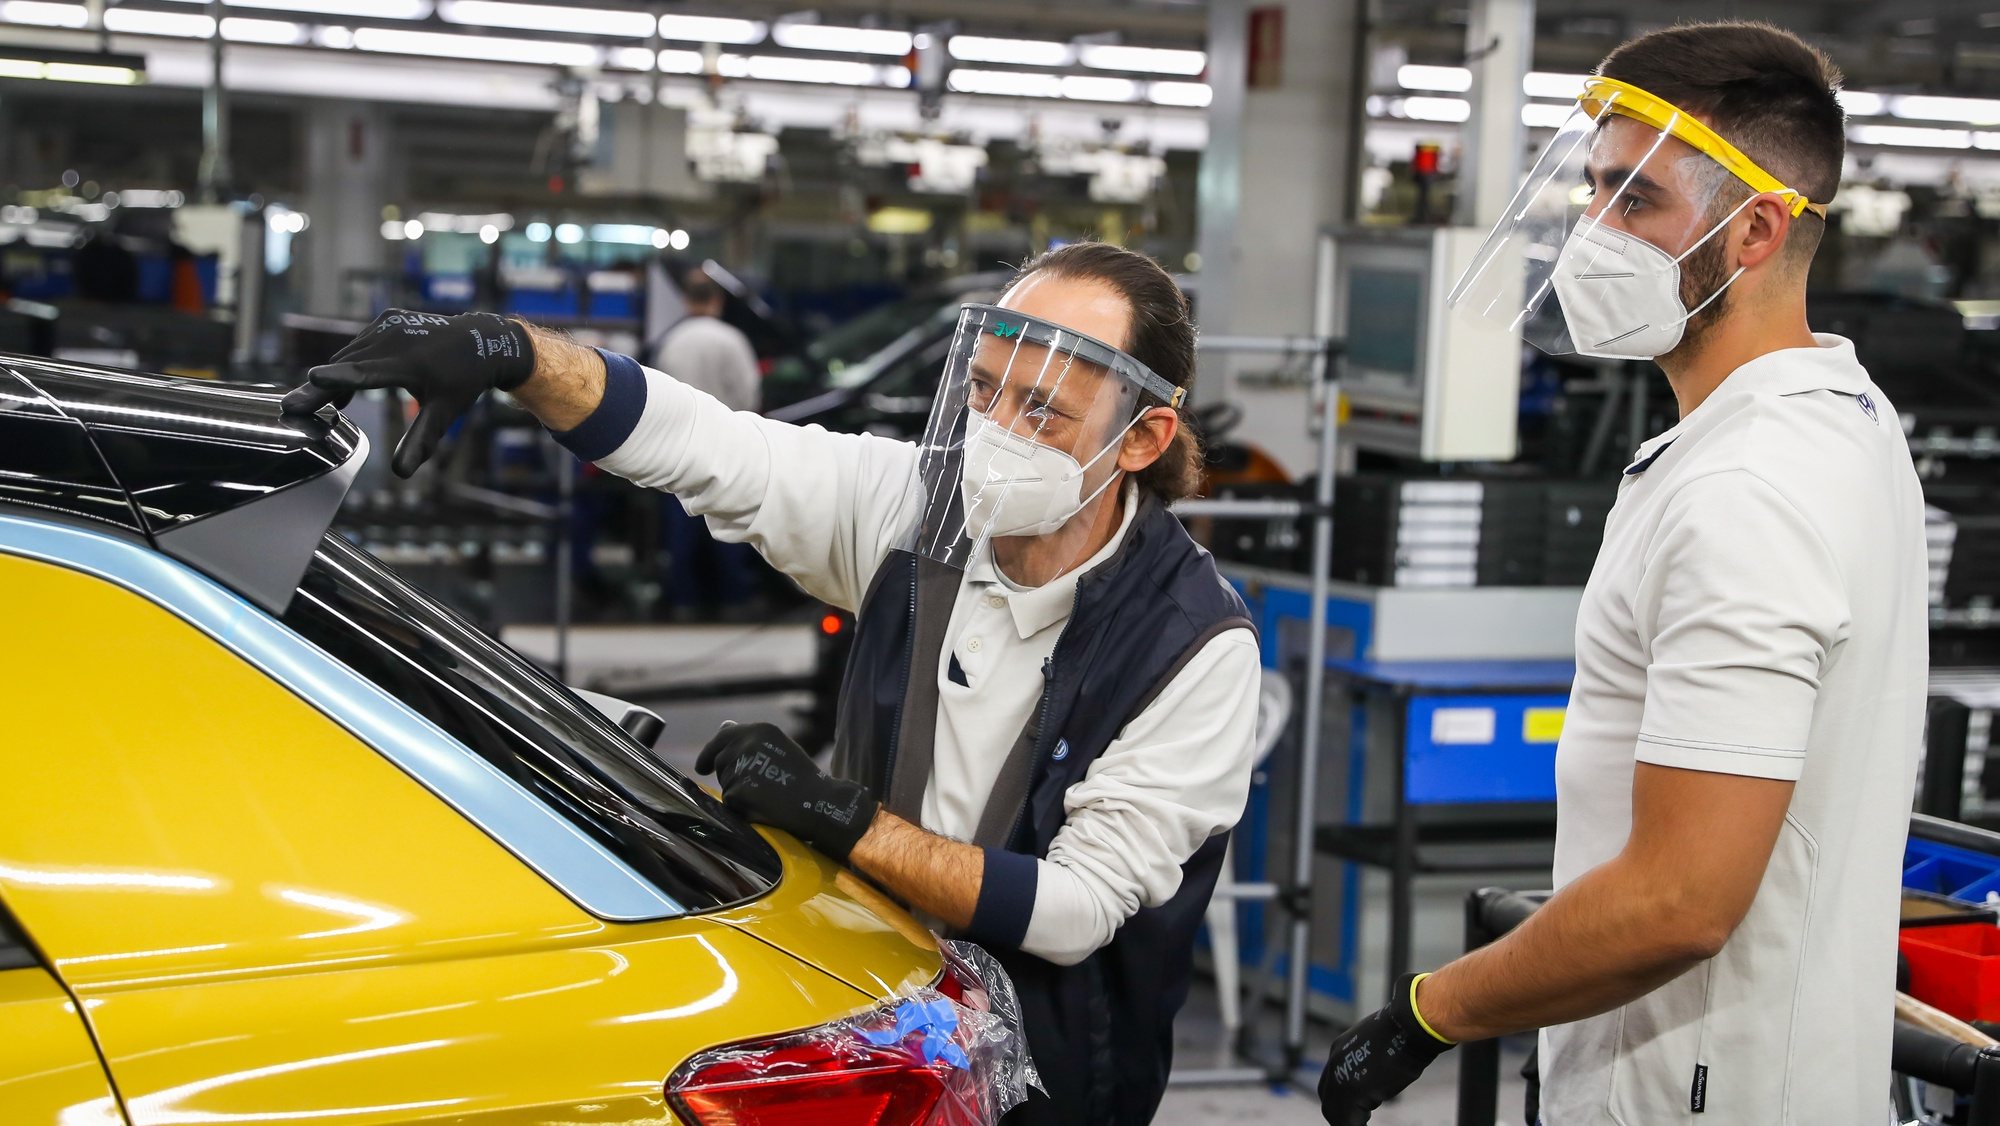 Autoeuropa employees work on the construction of Volkswagen T-Roc at Autoeuropa&#039;s plant in Palmela, Setubal, Portugal, 13 May 2020. JOSE SENA GOULAO/LUSA